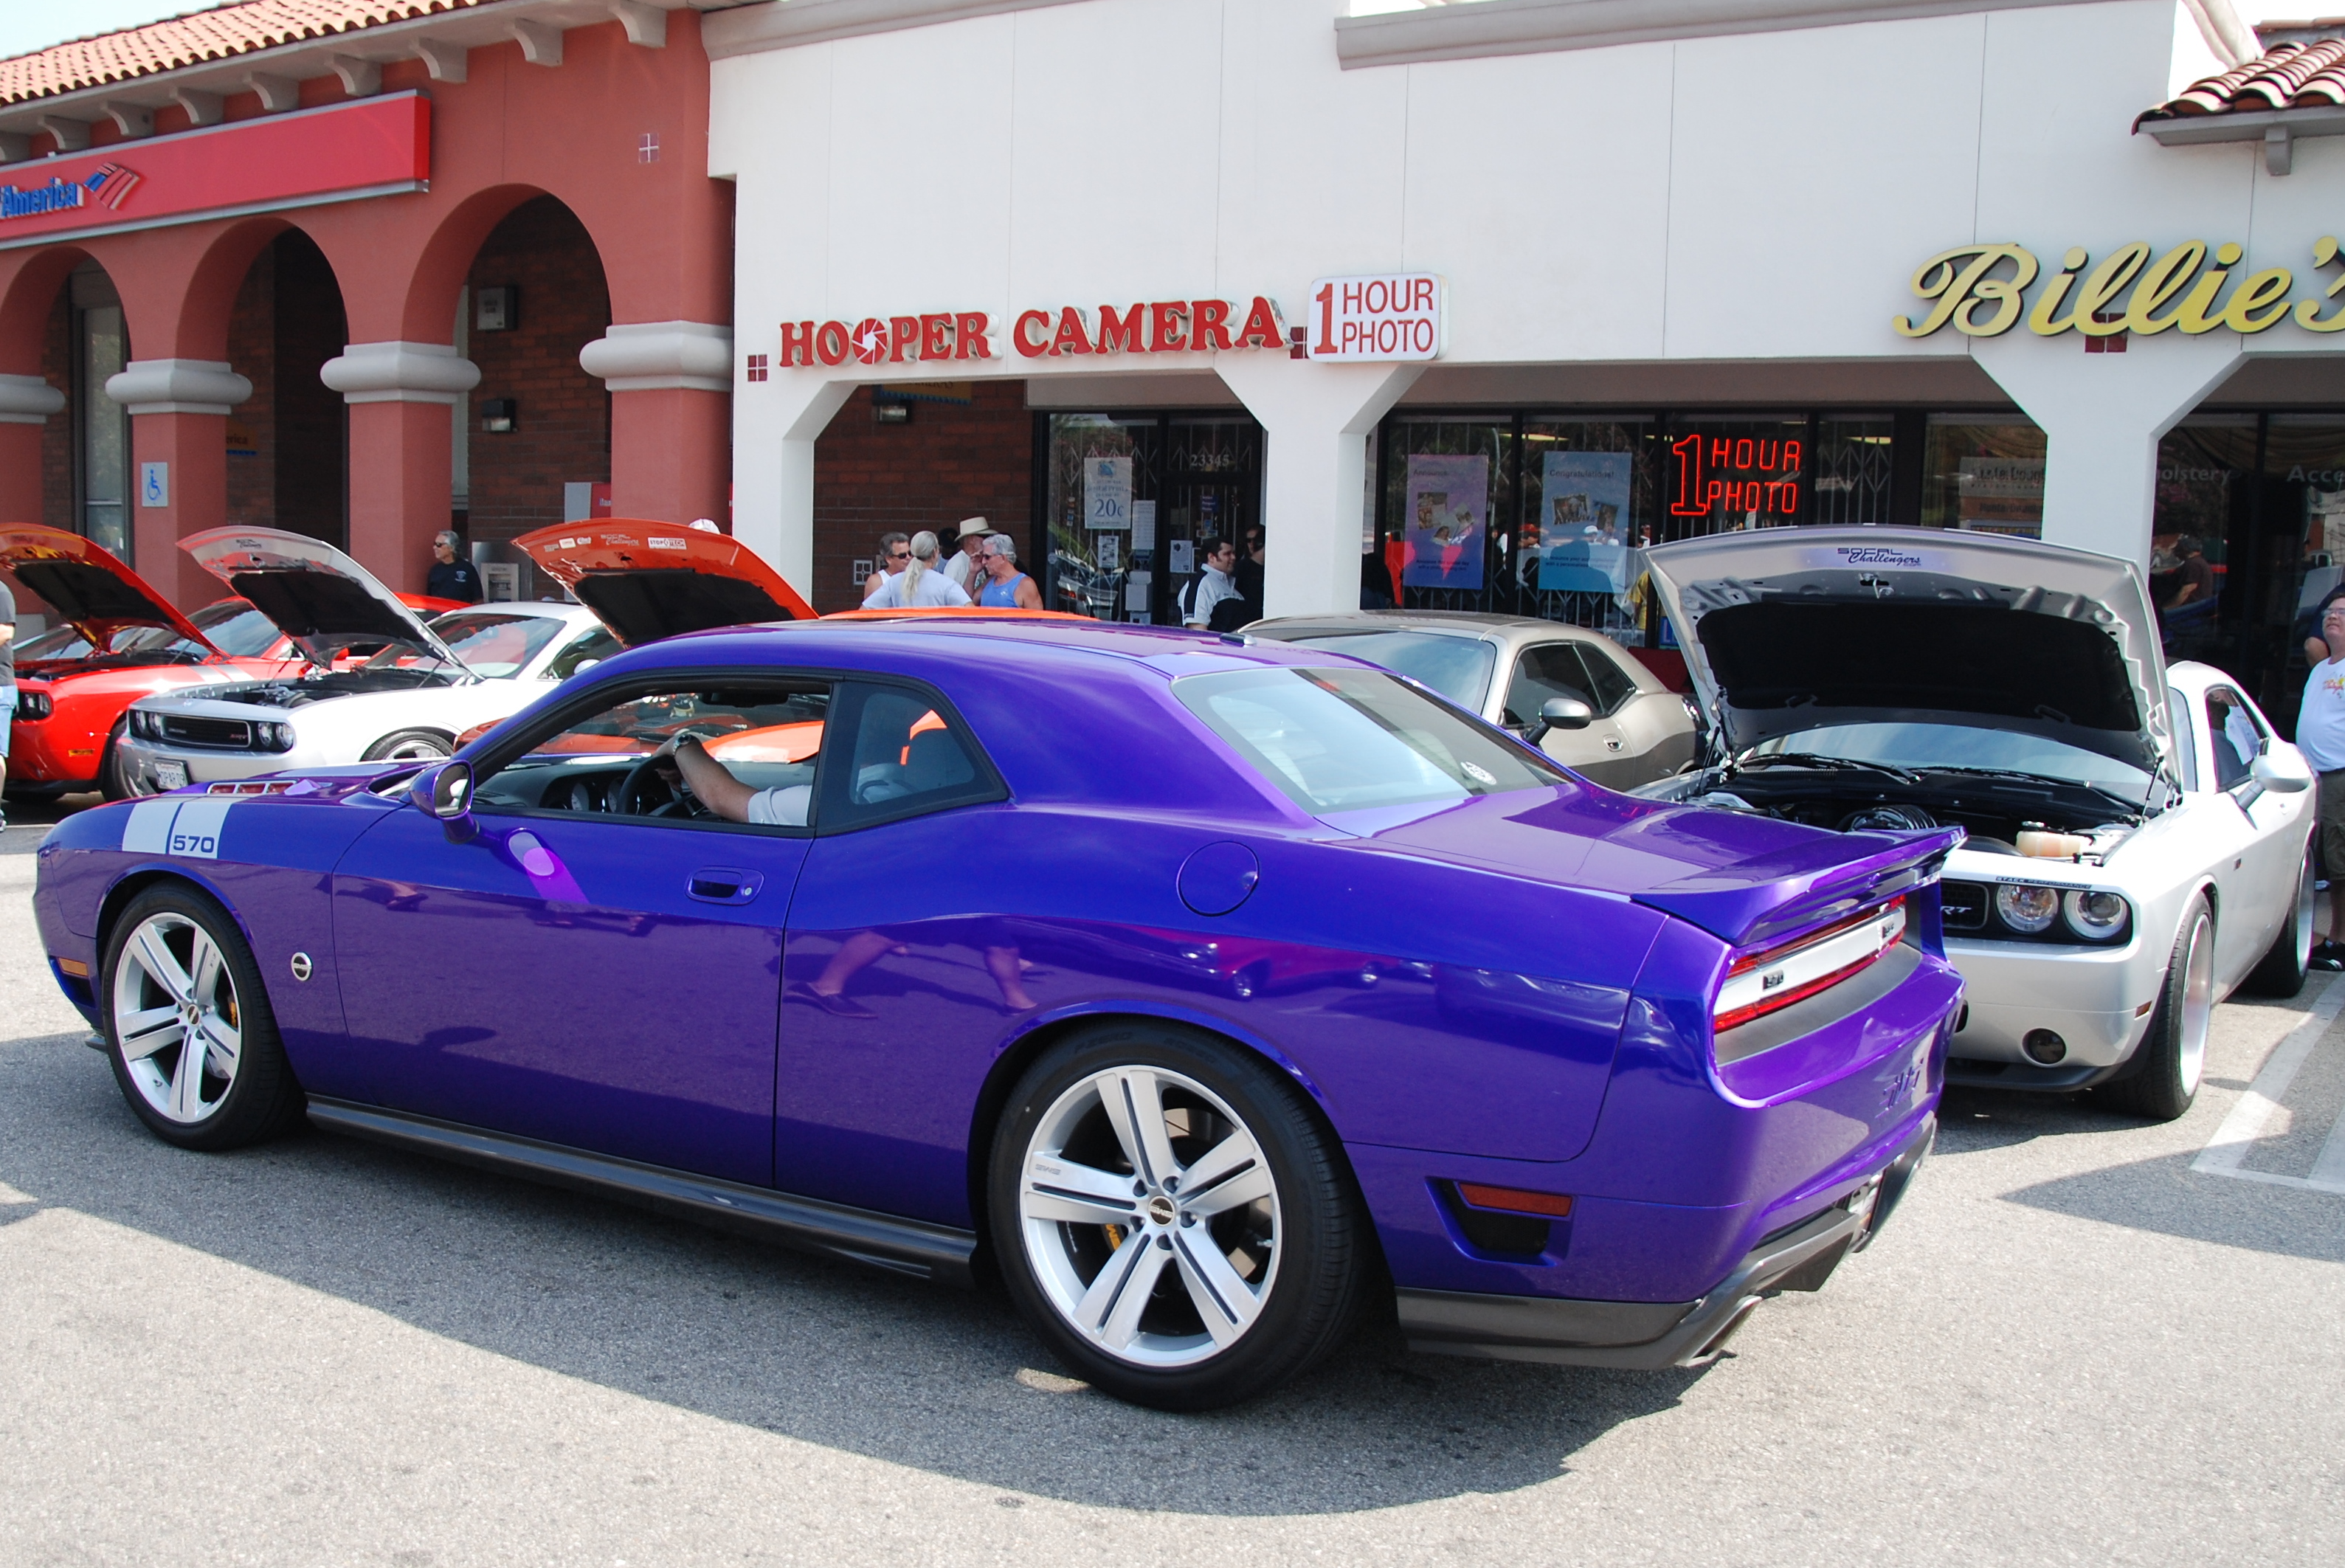 DODGE CHALLENGER SMS EDITION | Flickr - Photo Sharing!